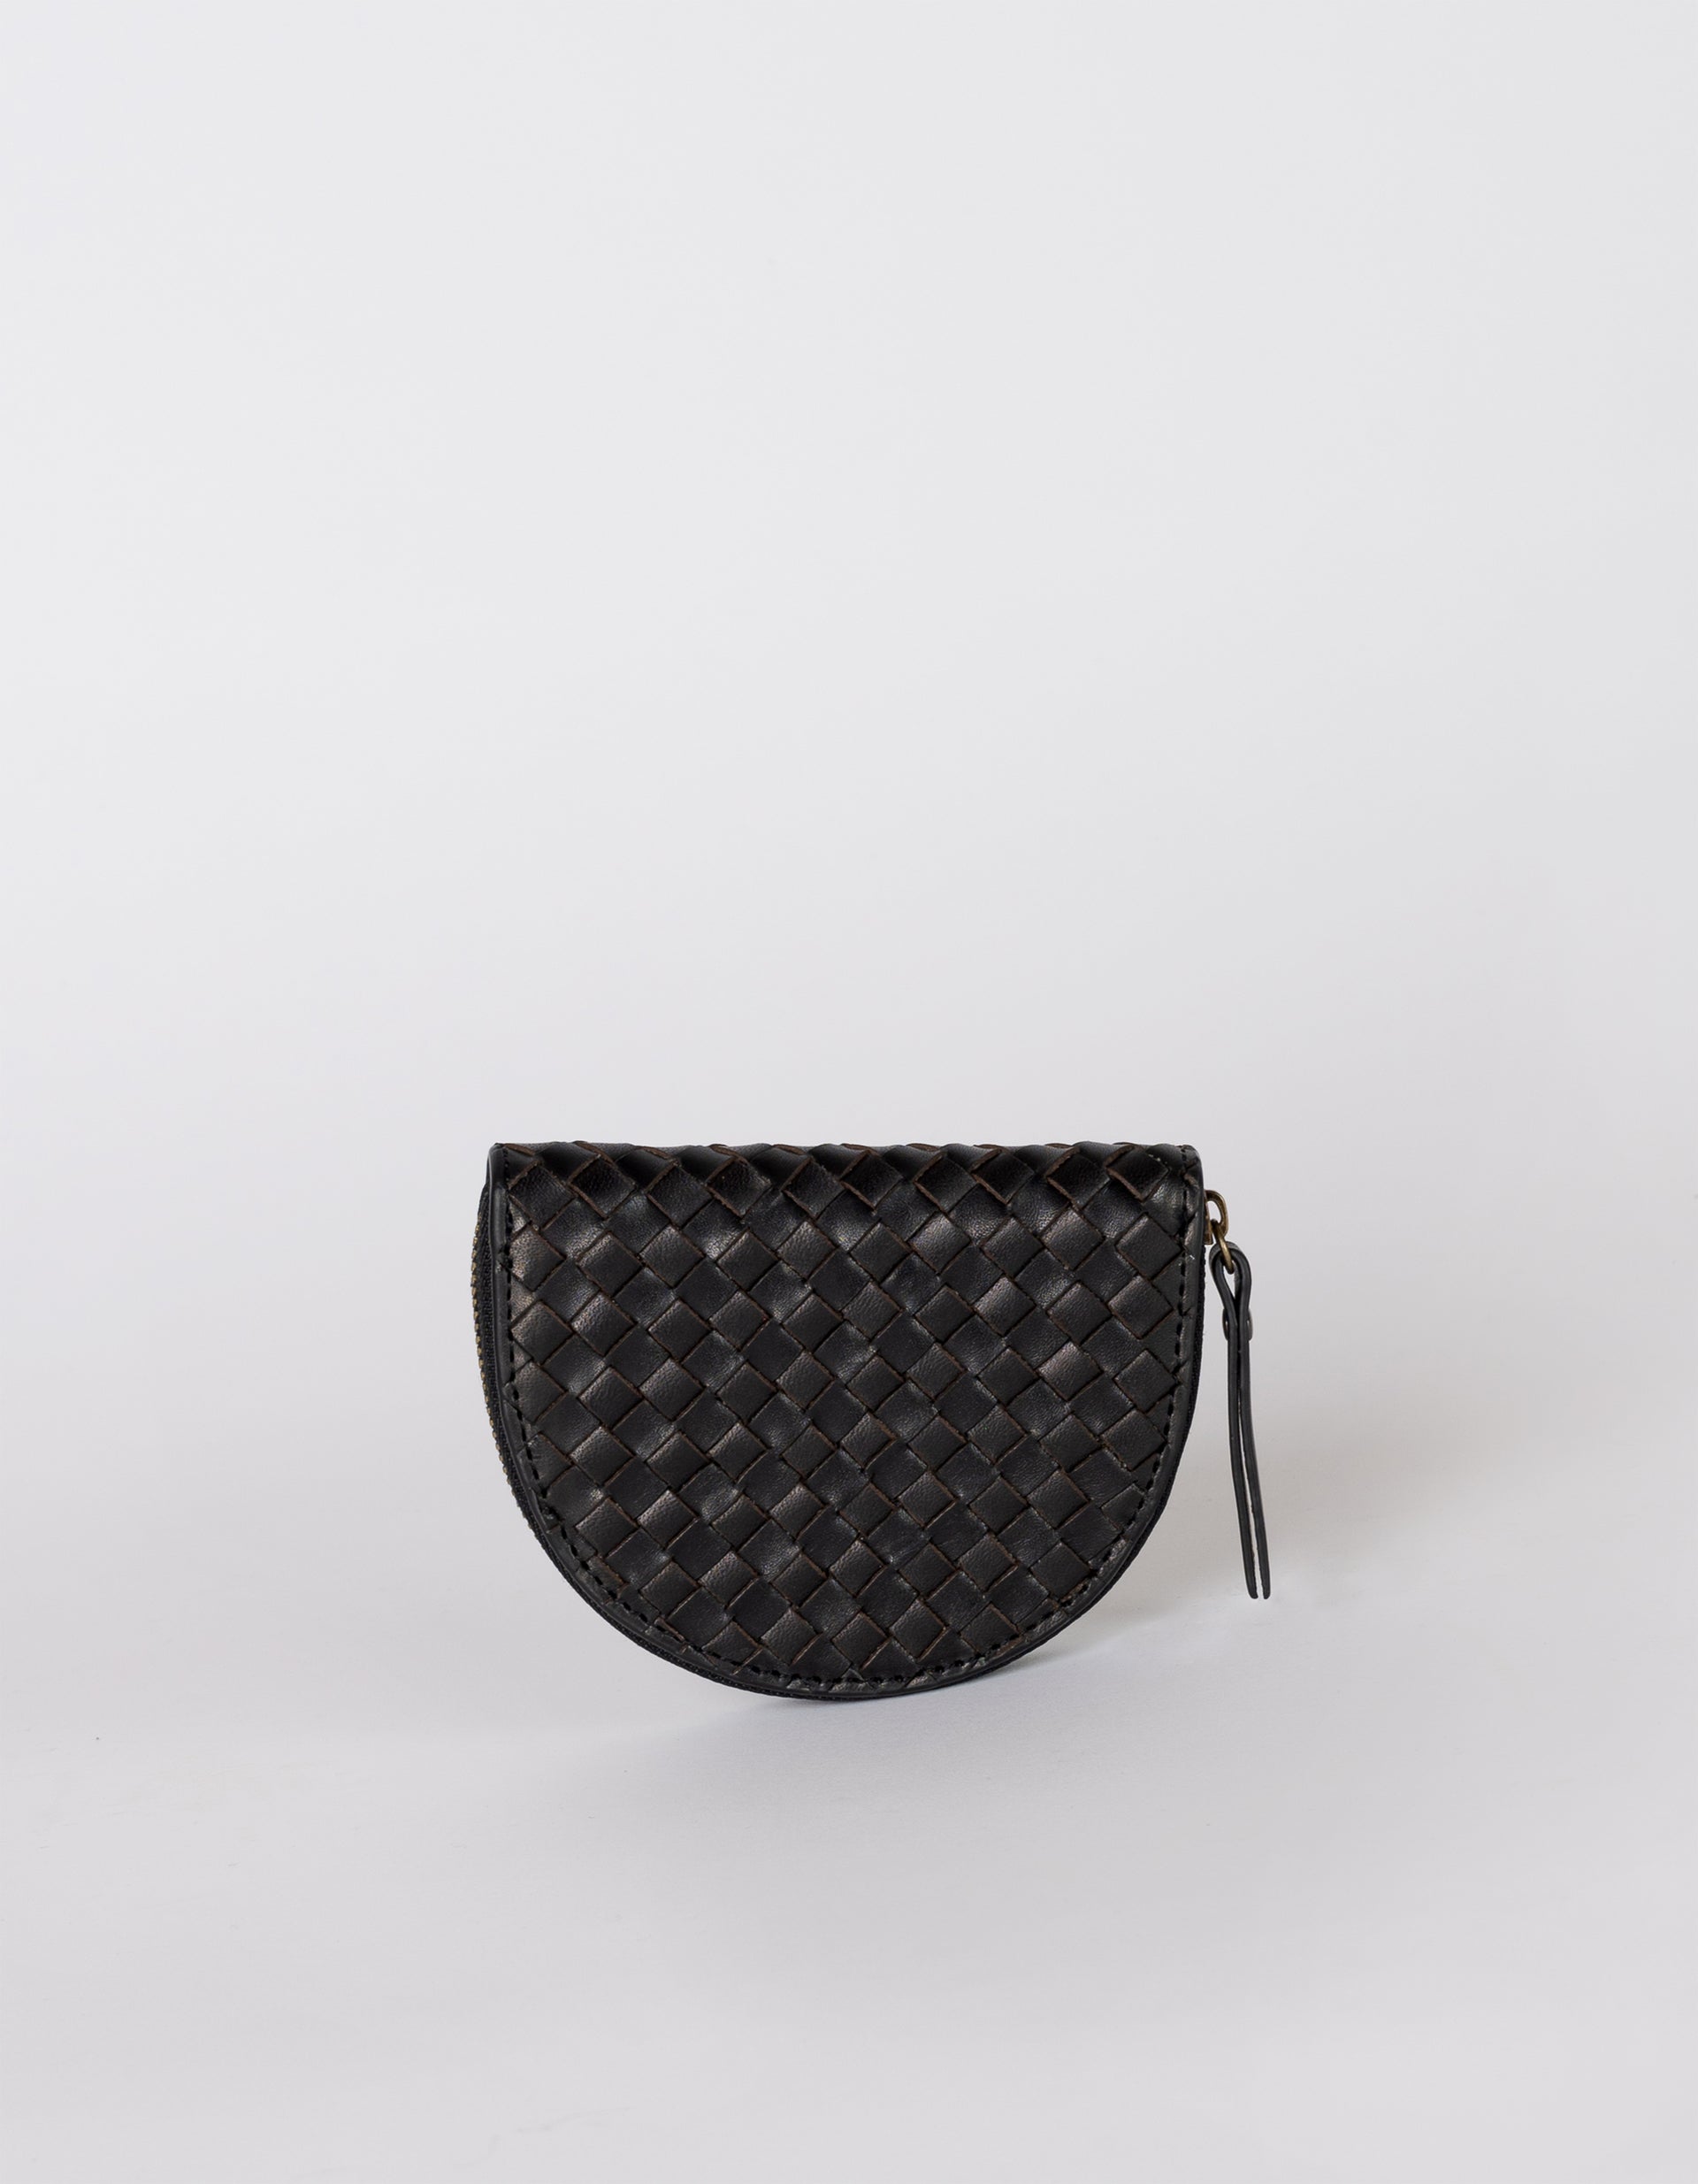 Laura coin purse in black woven leather - front image